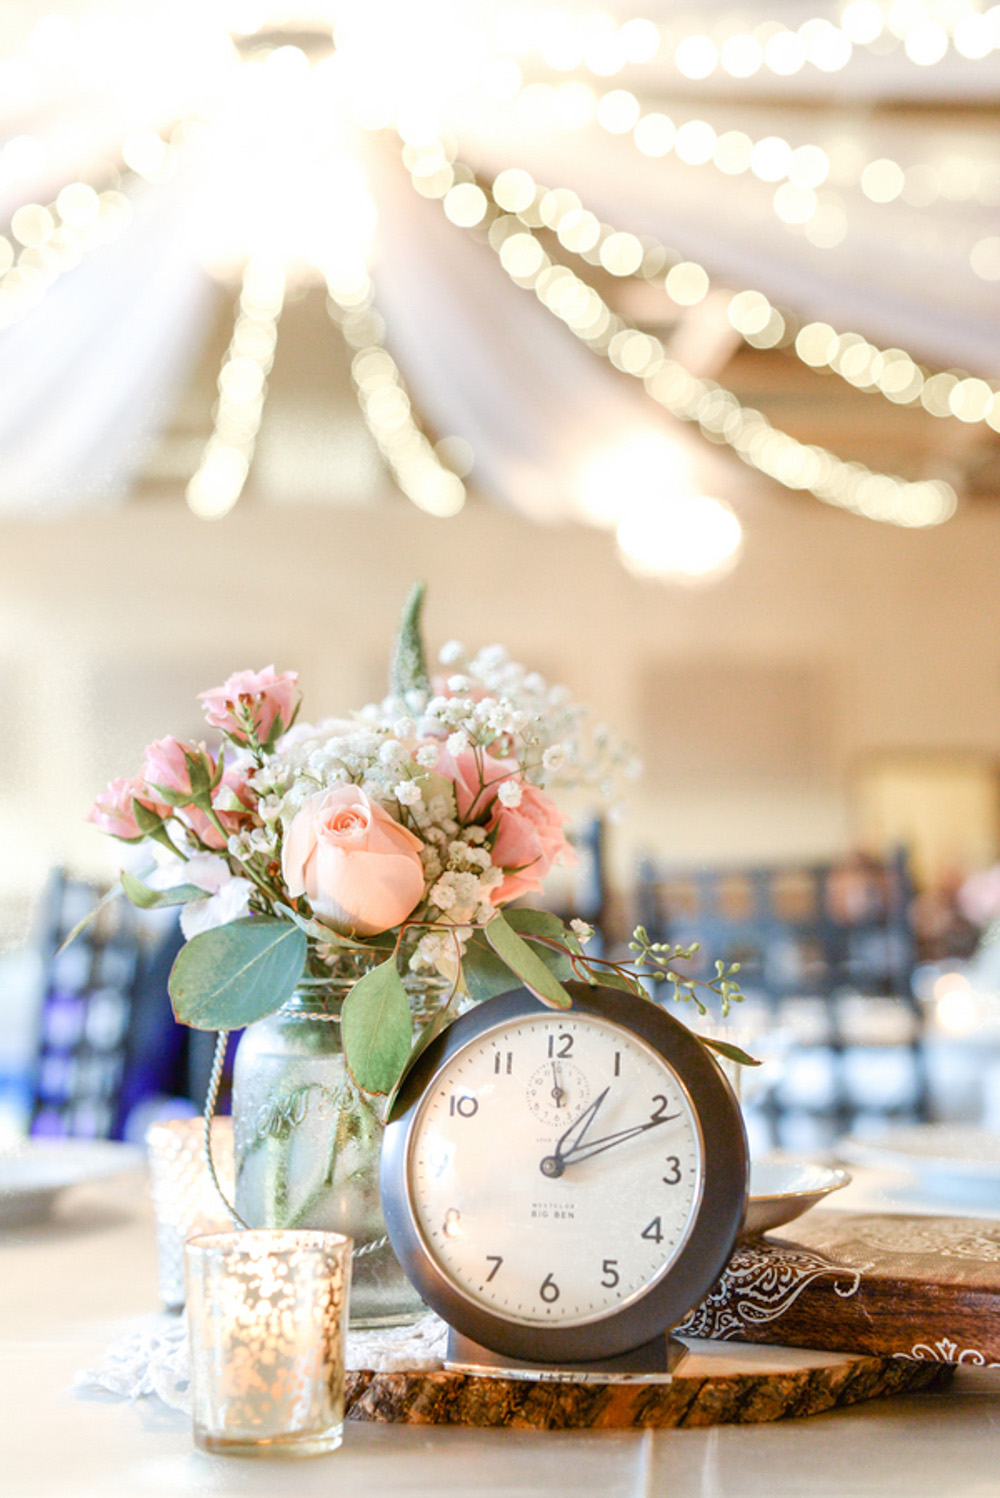 Blush and Grey Vintage Chic Inspired Wedding by Shively_Whitney_Monique_Hessler_Photography (23)